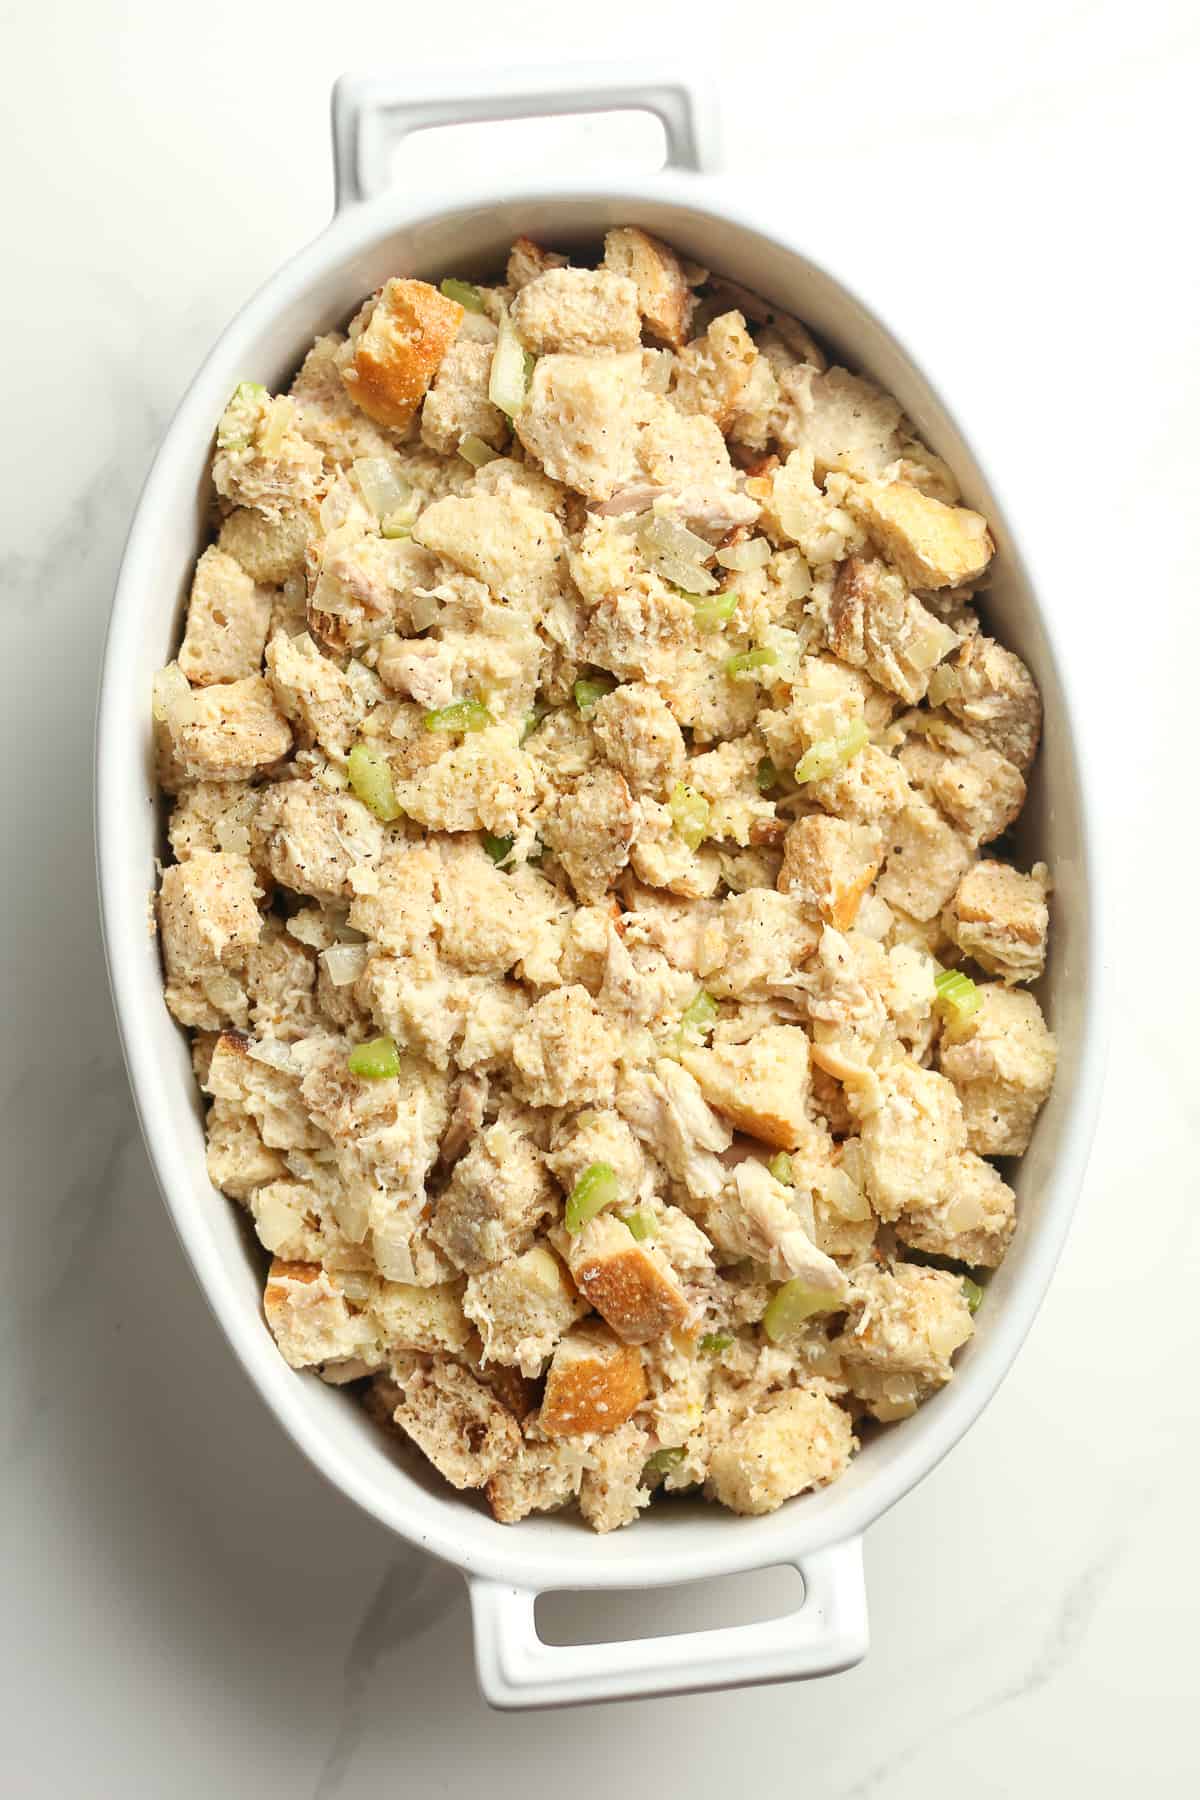 A casserole of stuffing before baking.